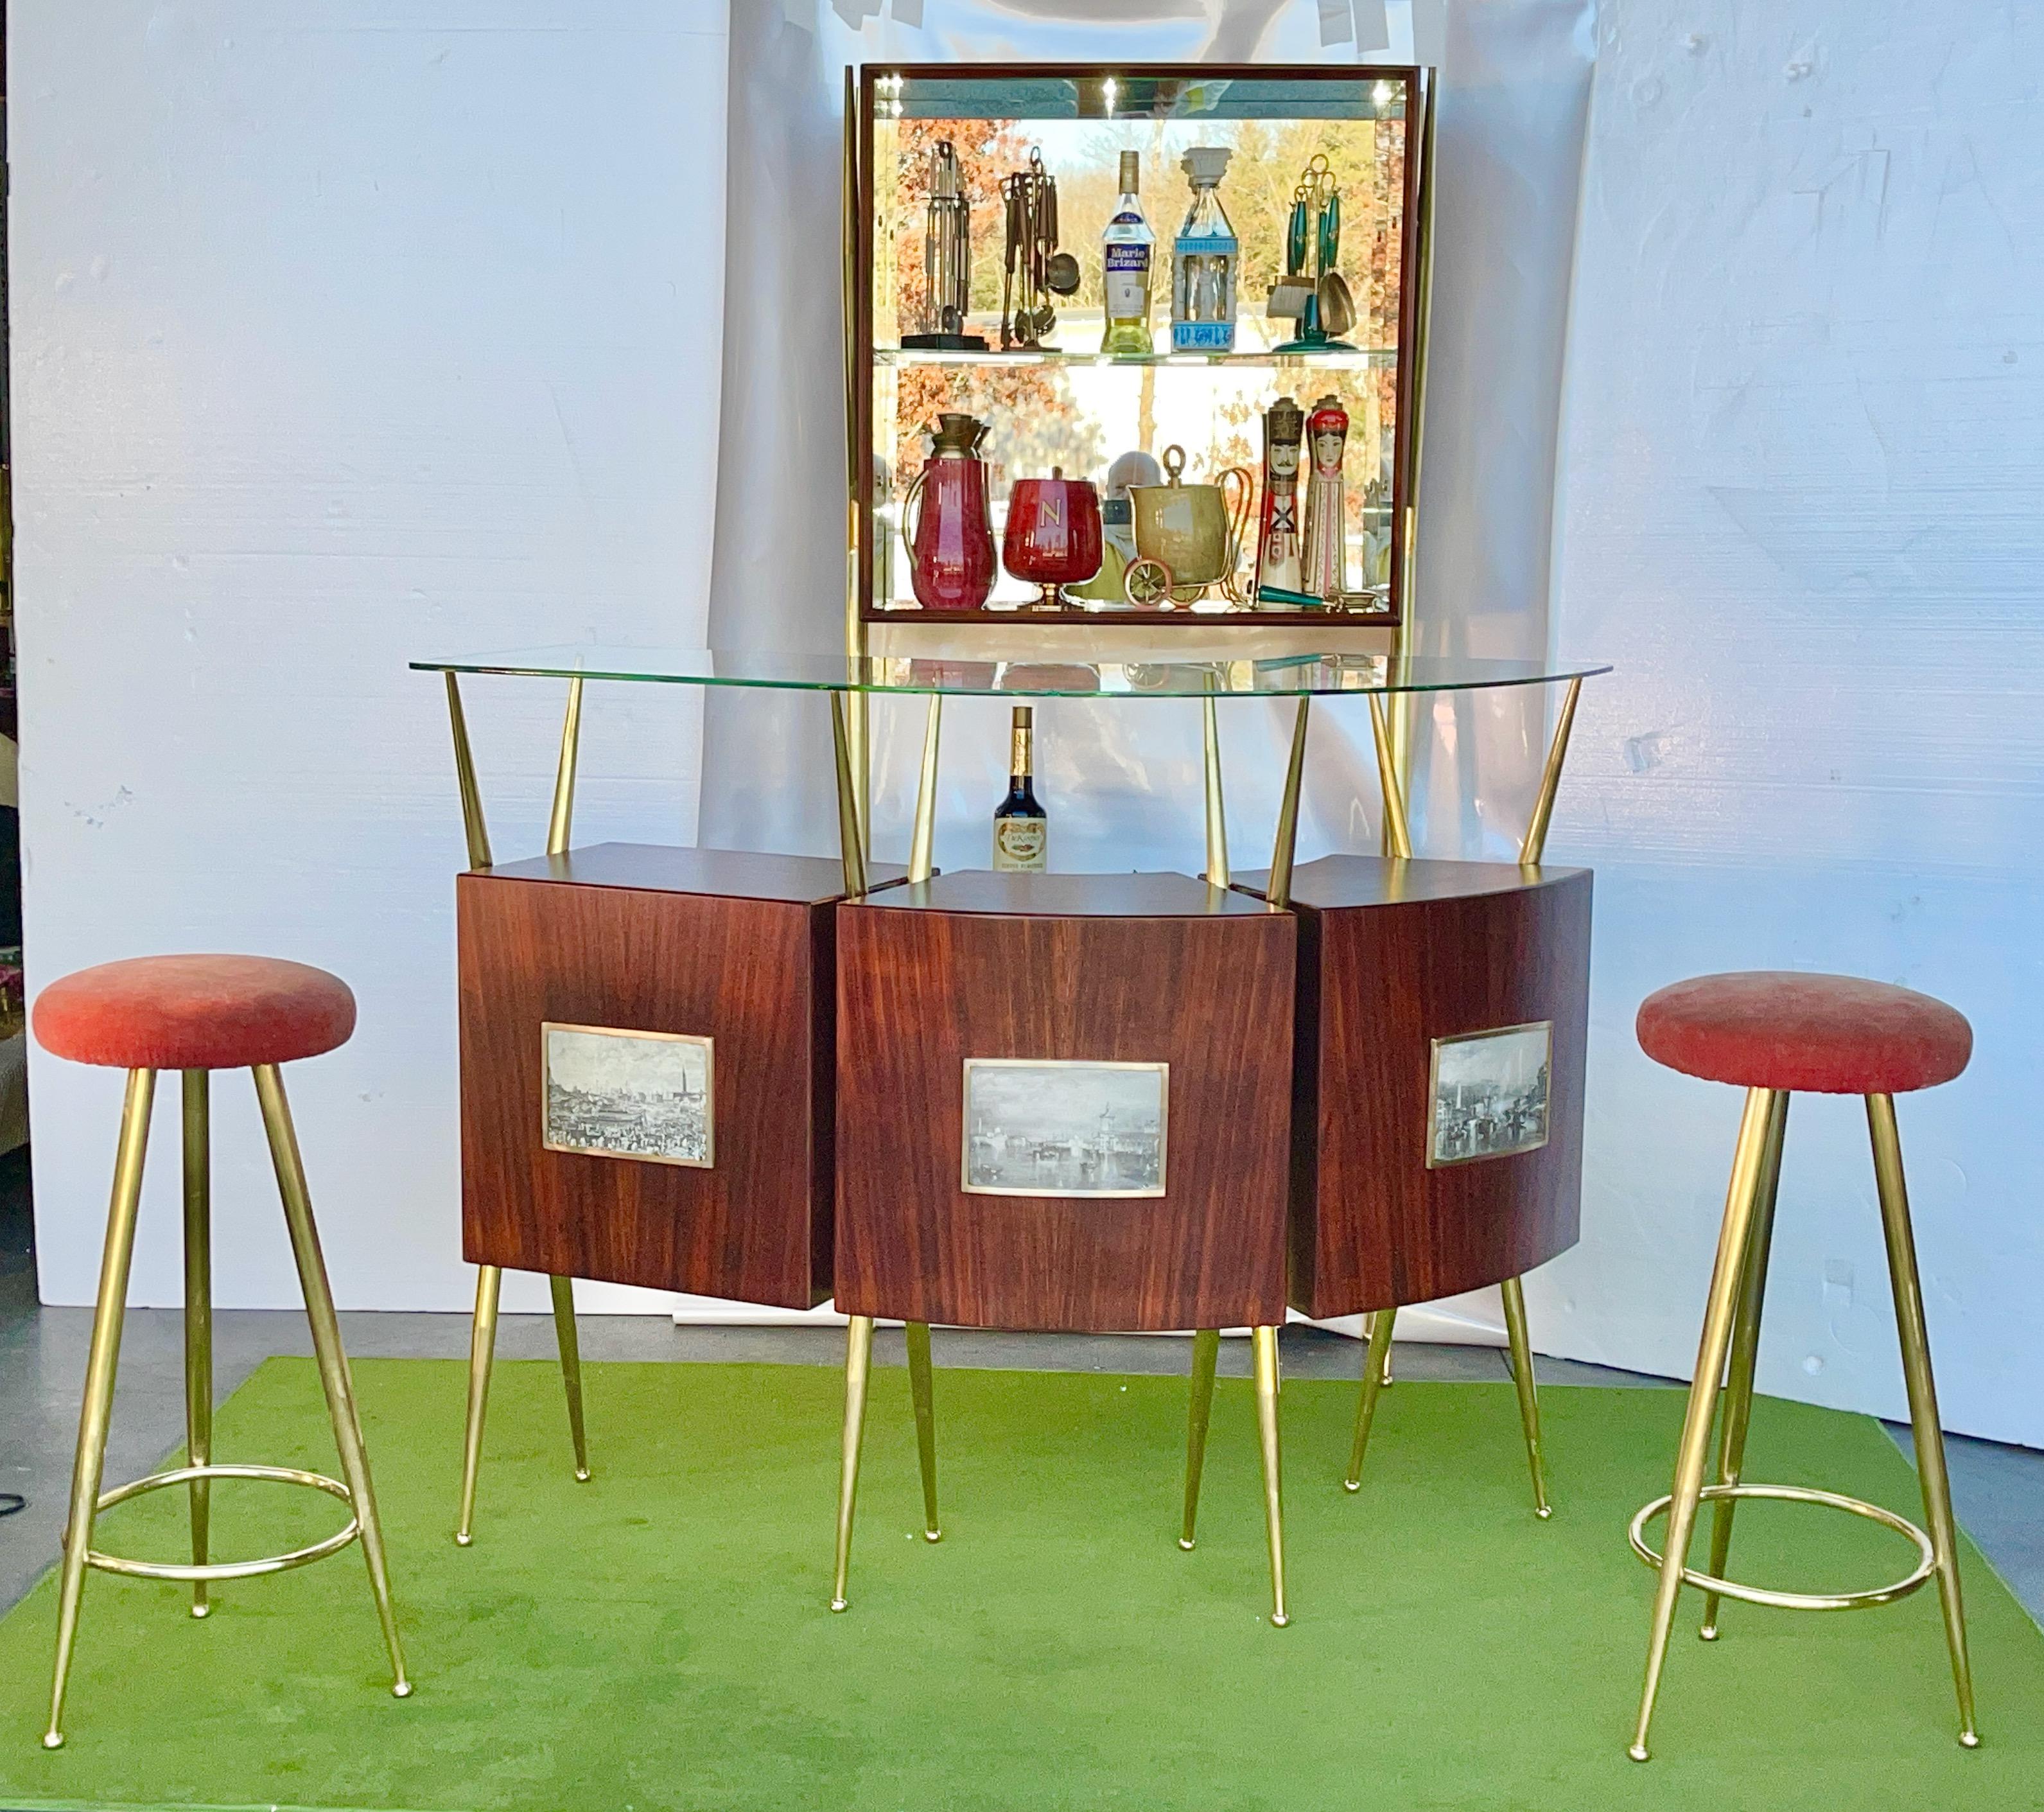 1950's Italian standing bar, back bar and pair of brass three legged bar stools.
Standing bar has three open cabinets in satin finished palisander veneer held aloft by angular tapered tubular brass scaffolds. and a floating curved glass